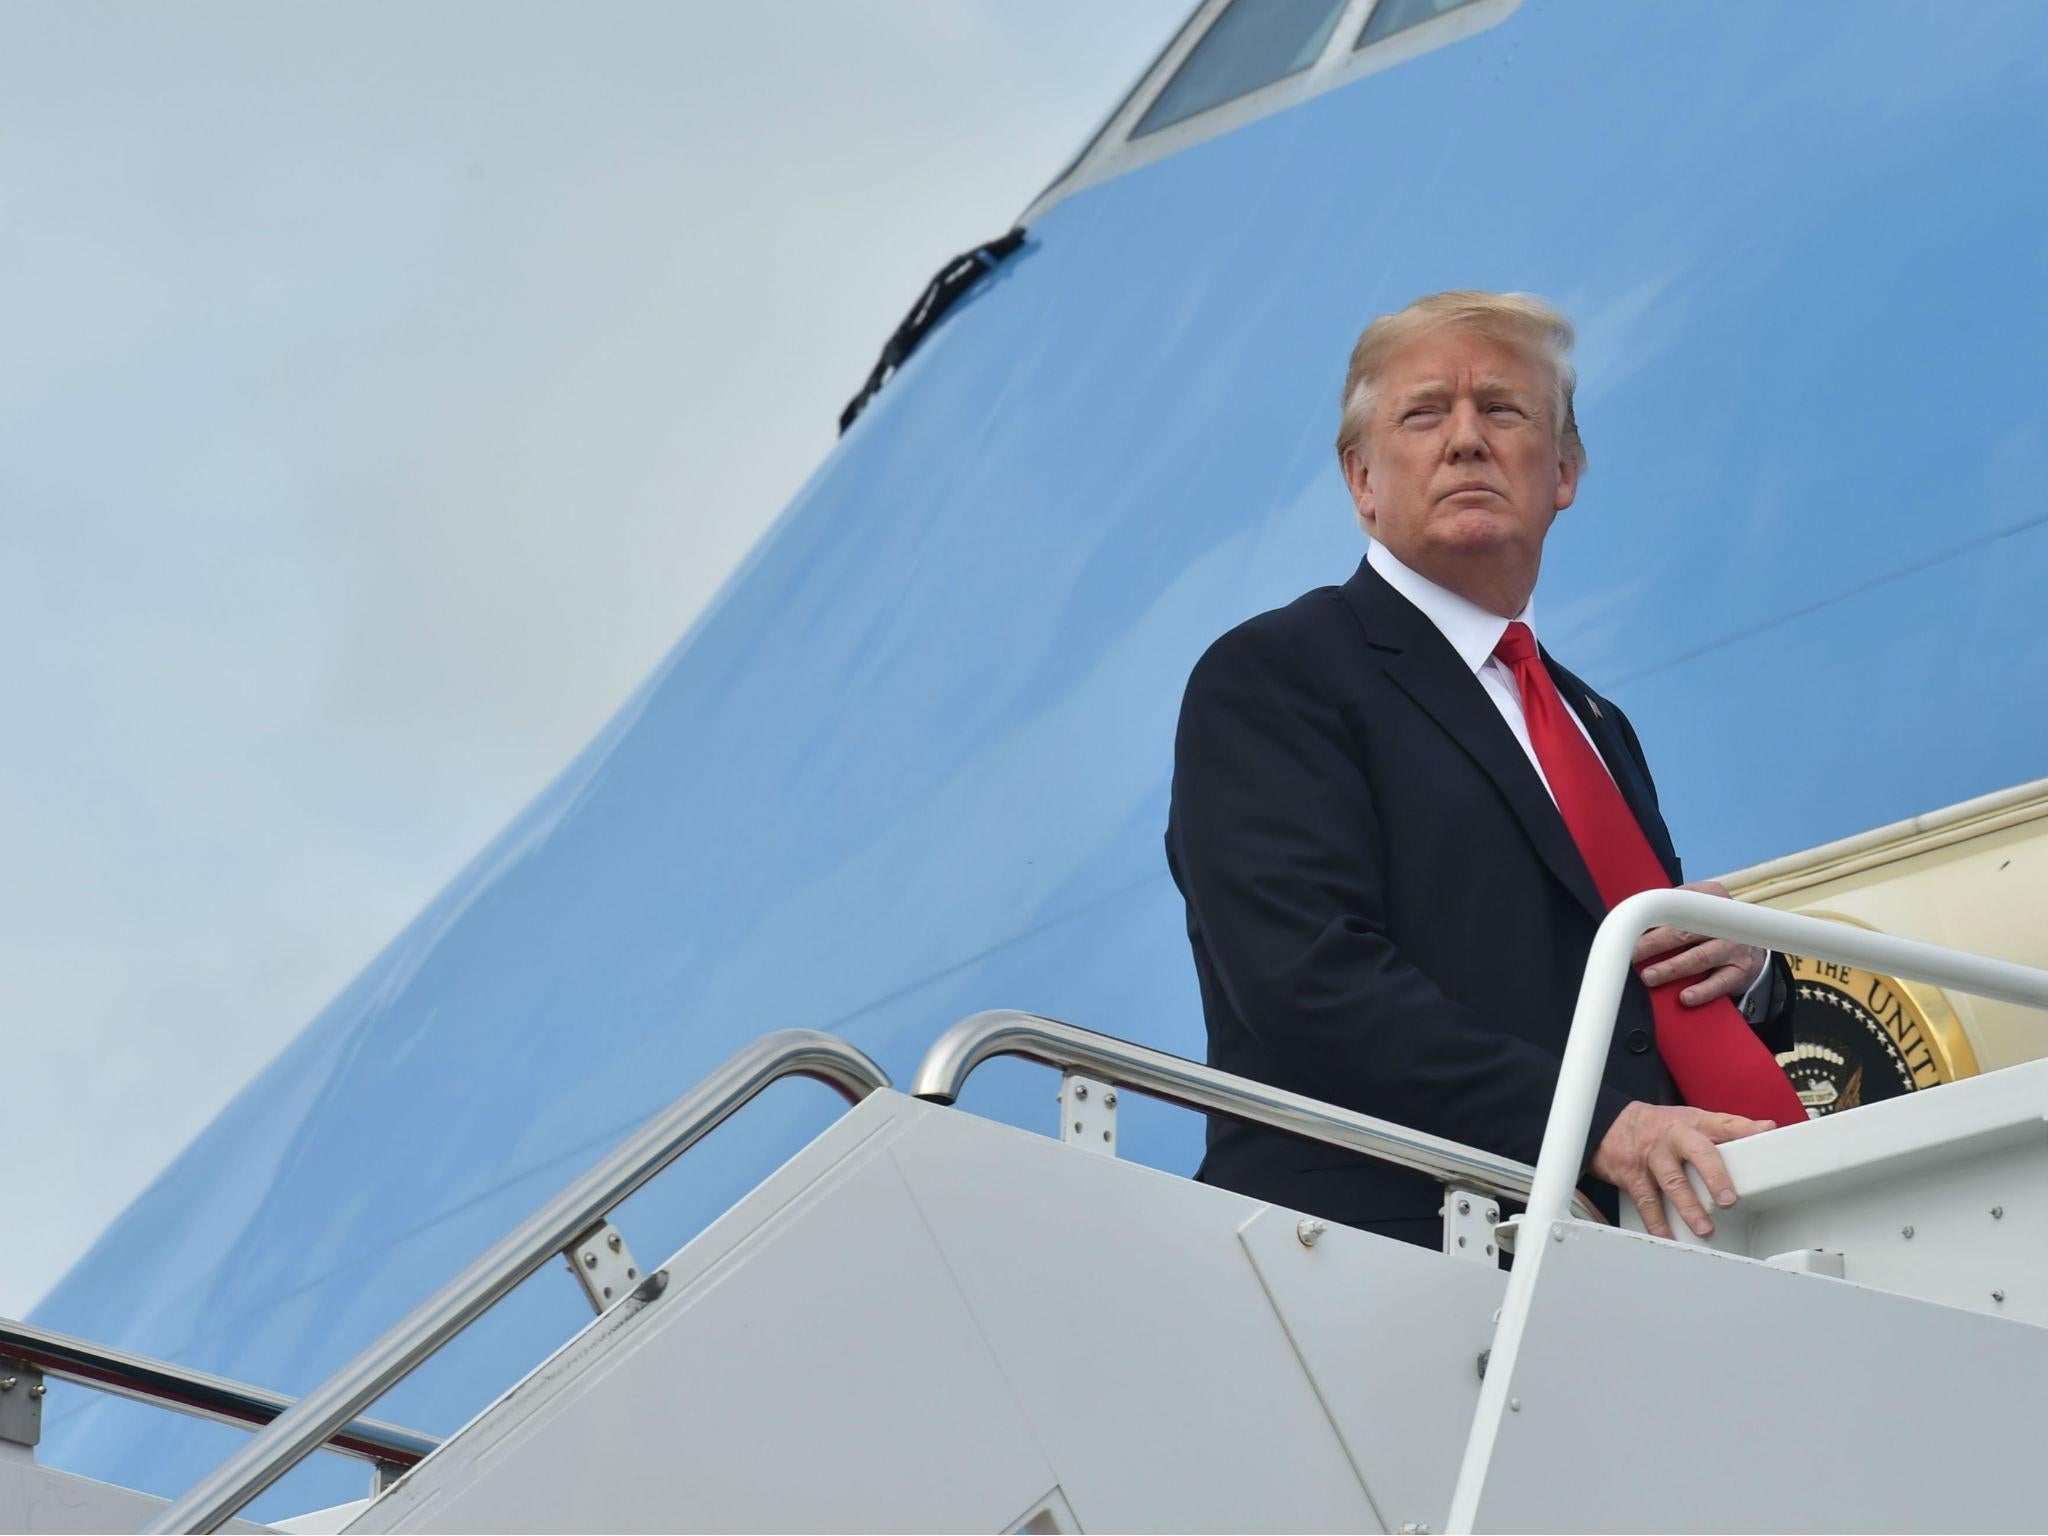 Mr Trump told reporters he is considering the pardon and commutation on board Air Force One